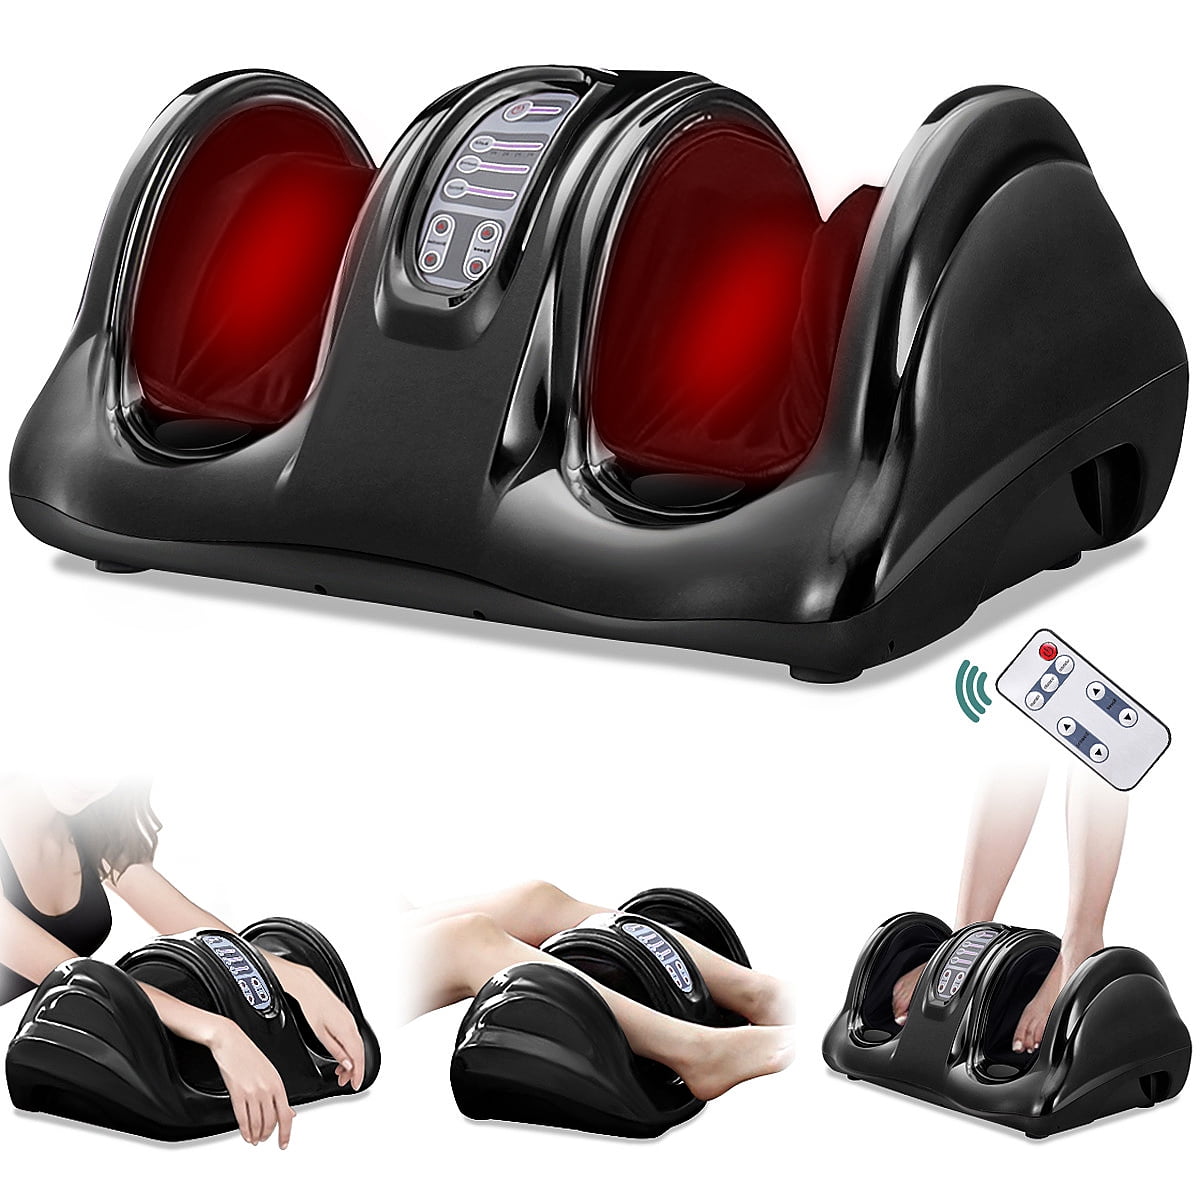  RESTECK™ Shiatsu Foot Massager Machine with Heat {Remote  Control} Deep Kneading Massage Therapy, Air Compression, Relieve Foot Pain  from Plantar Fasciitis, Neuropathy & Chronic Nerve Pain : Health & Household